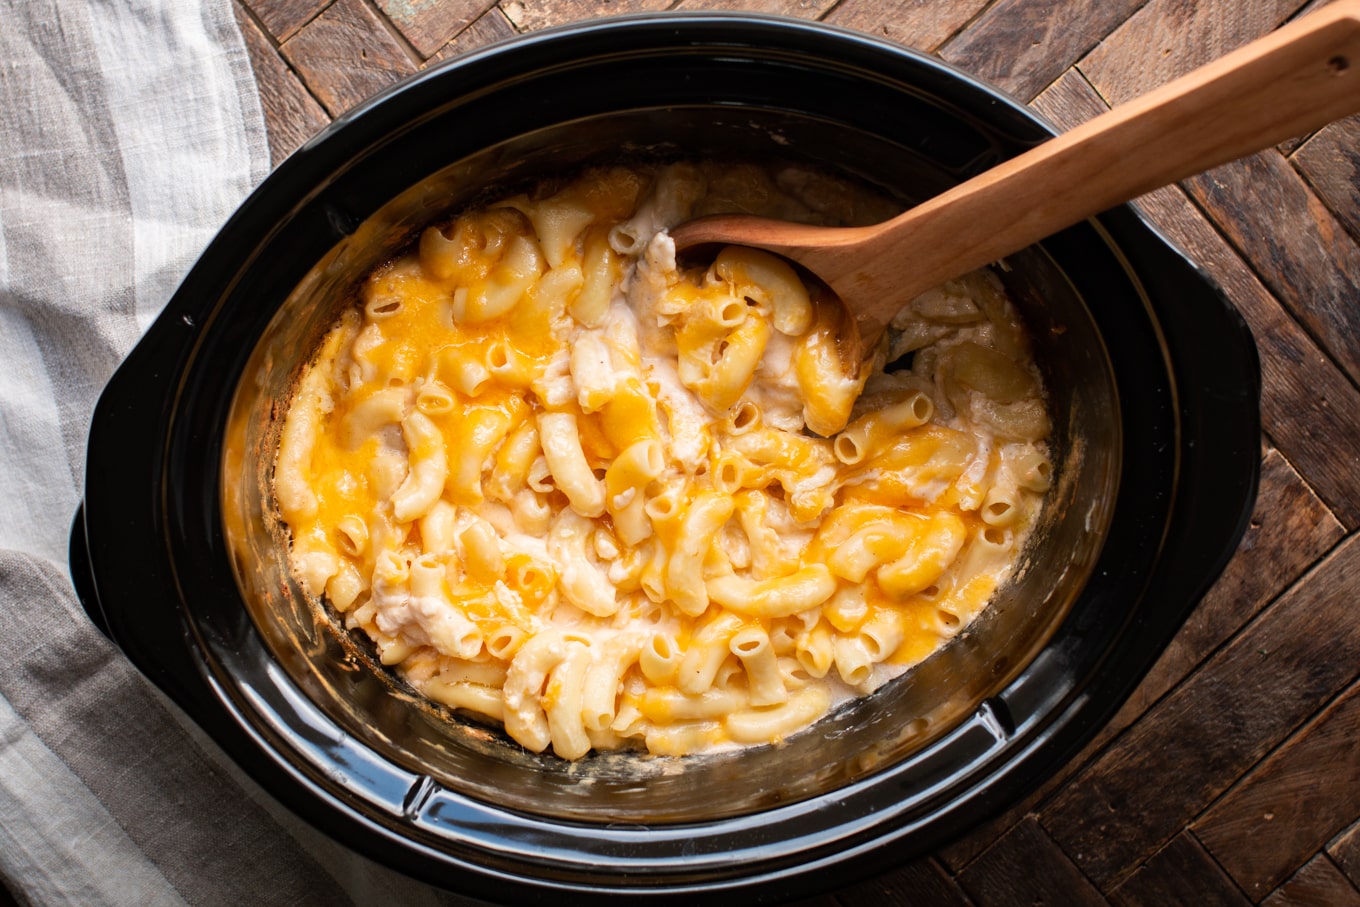 Cooked large macaroni and cheese in the slow cooker, large wooden spoon in it.